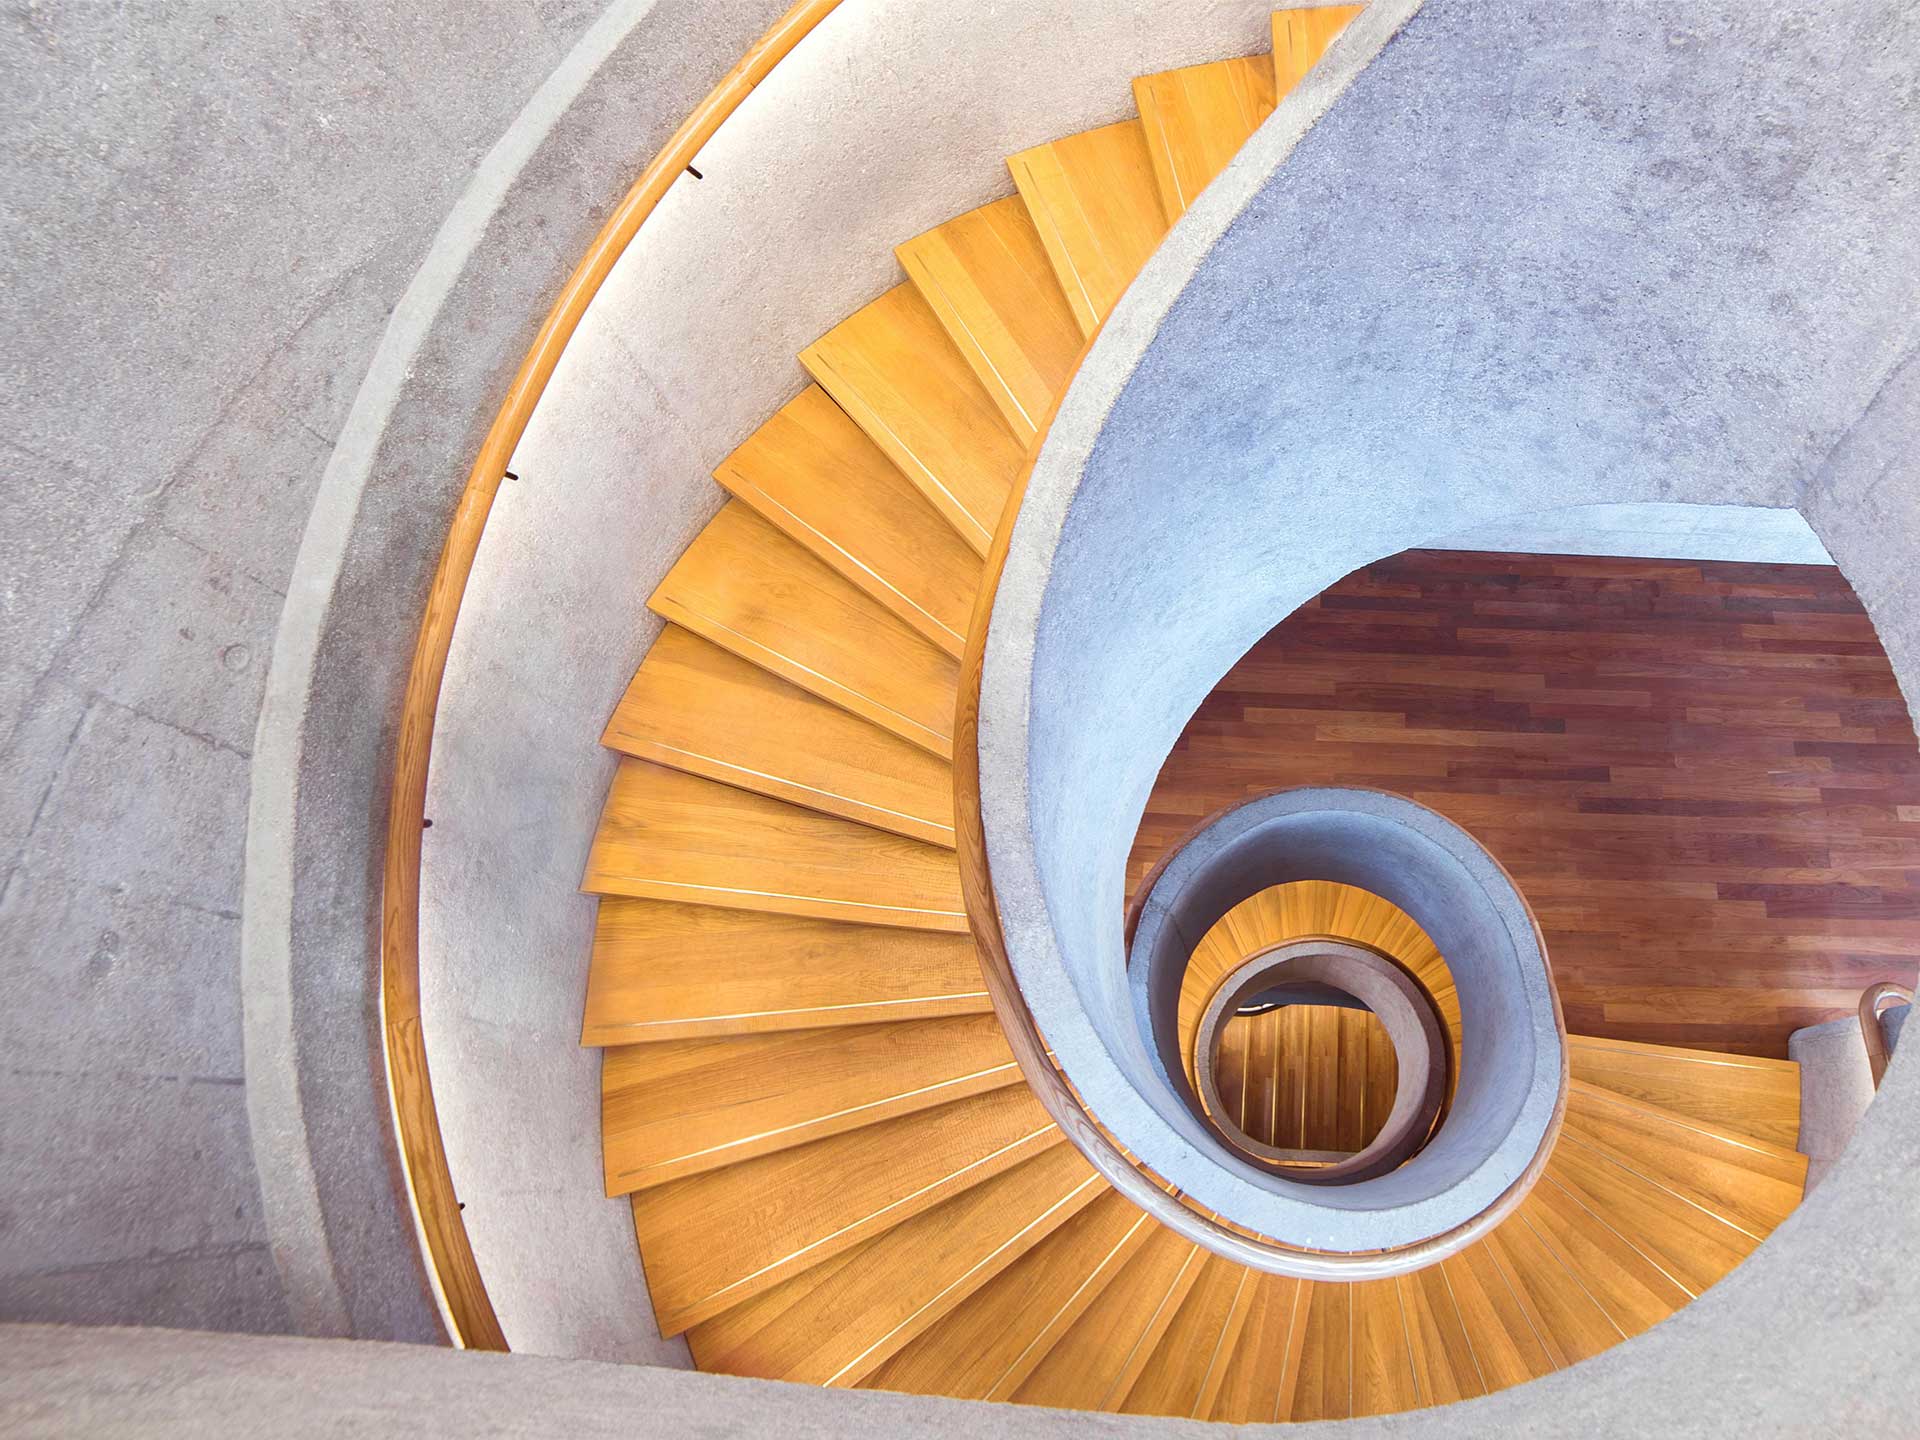 Spiral staircases as a stair decorating idea will never go out of fashion